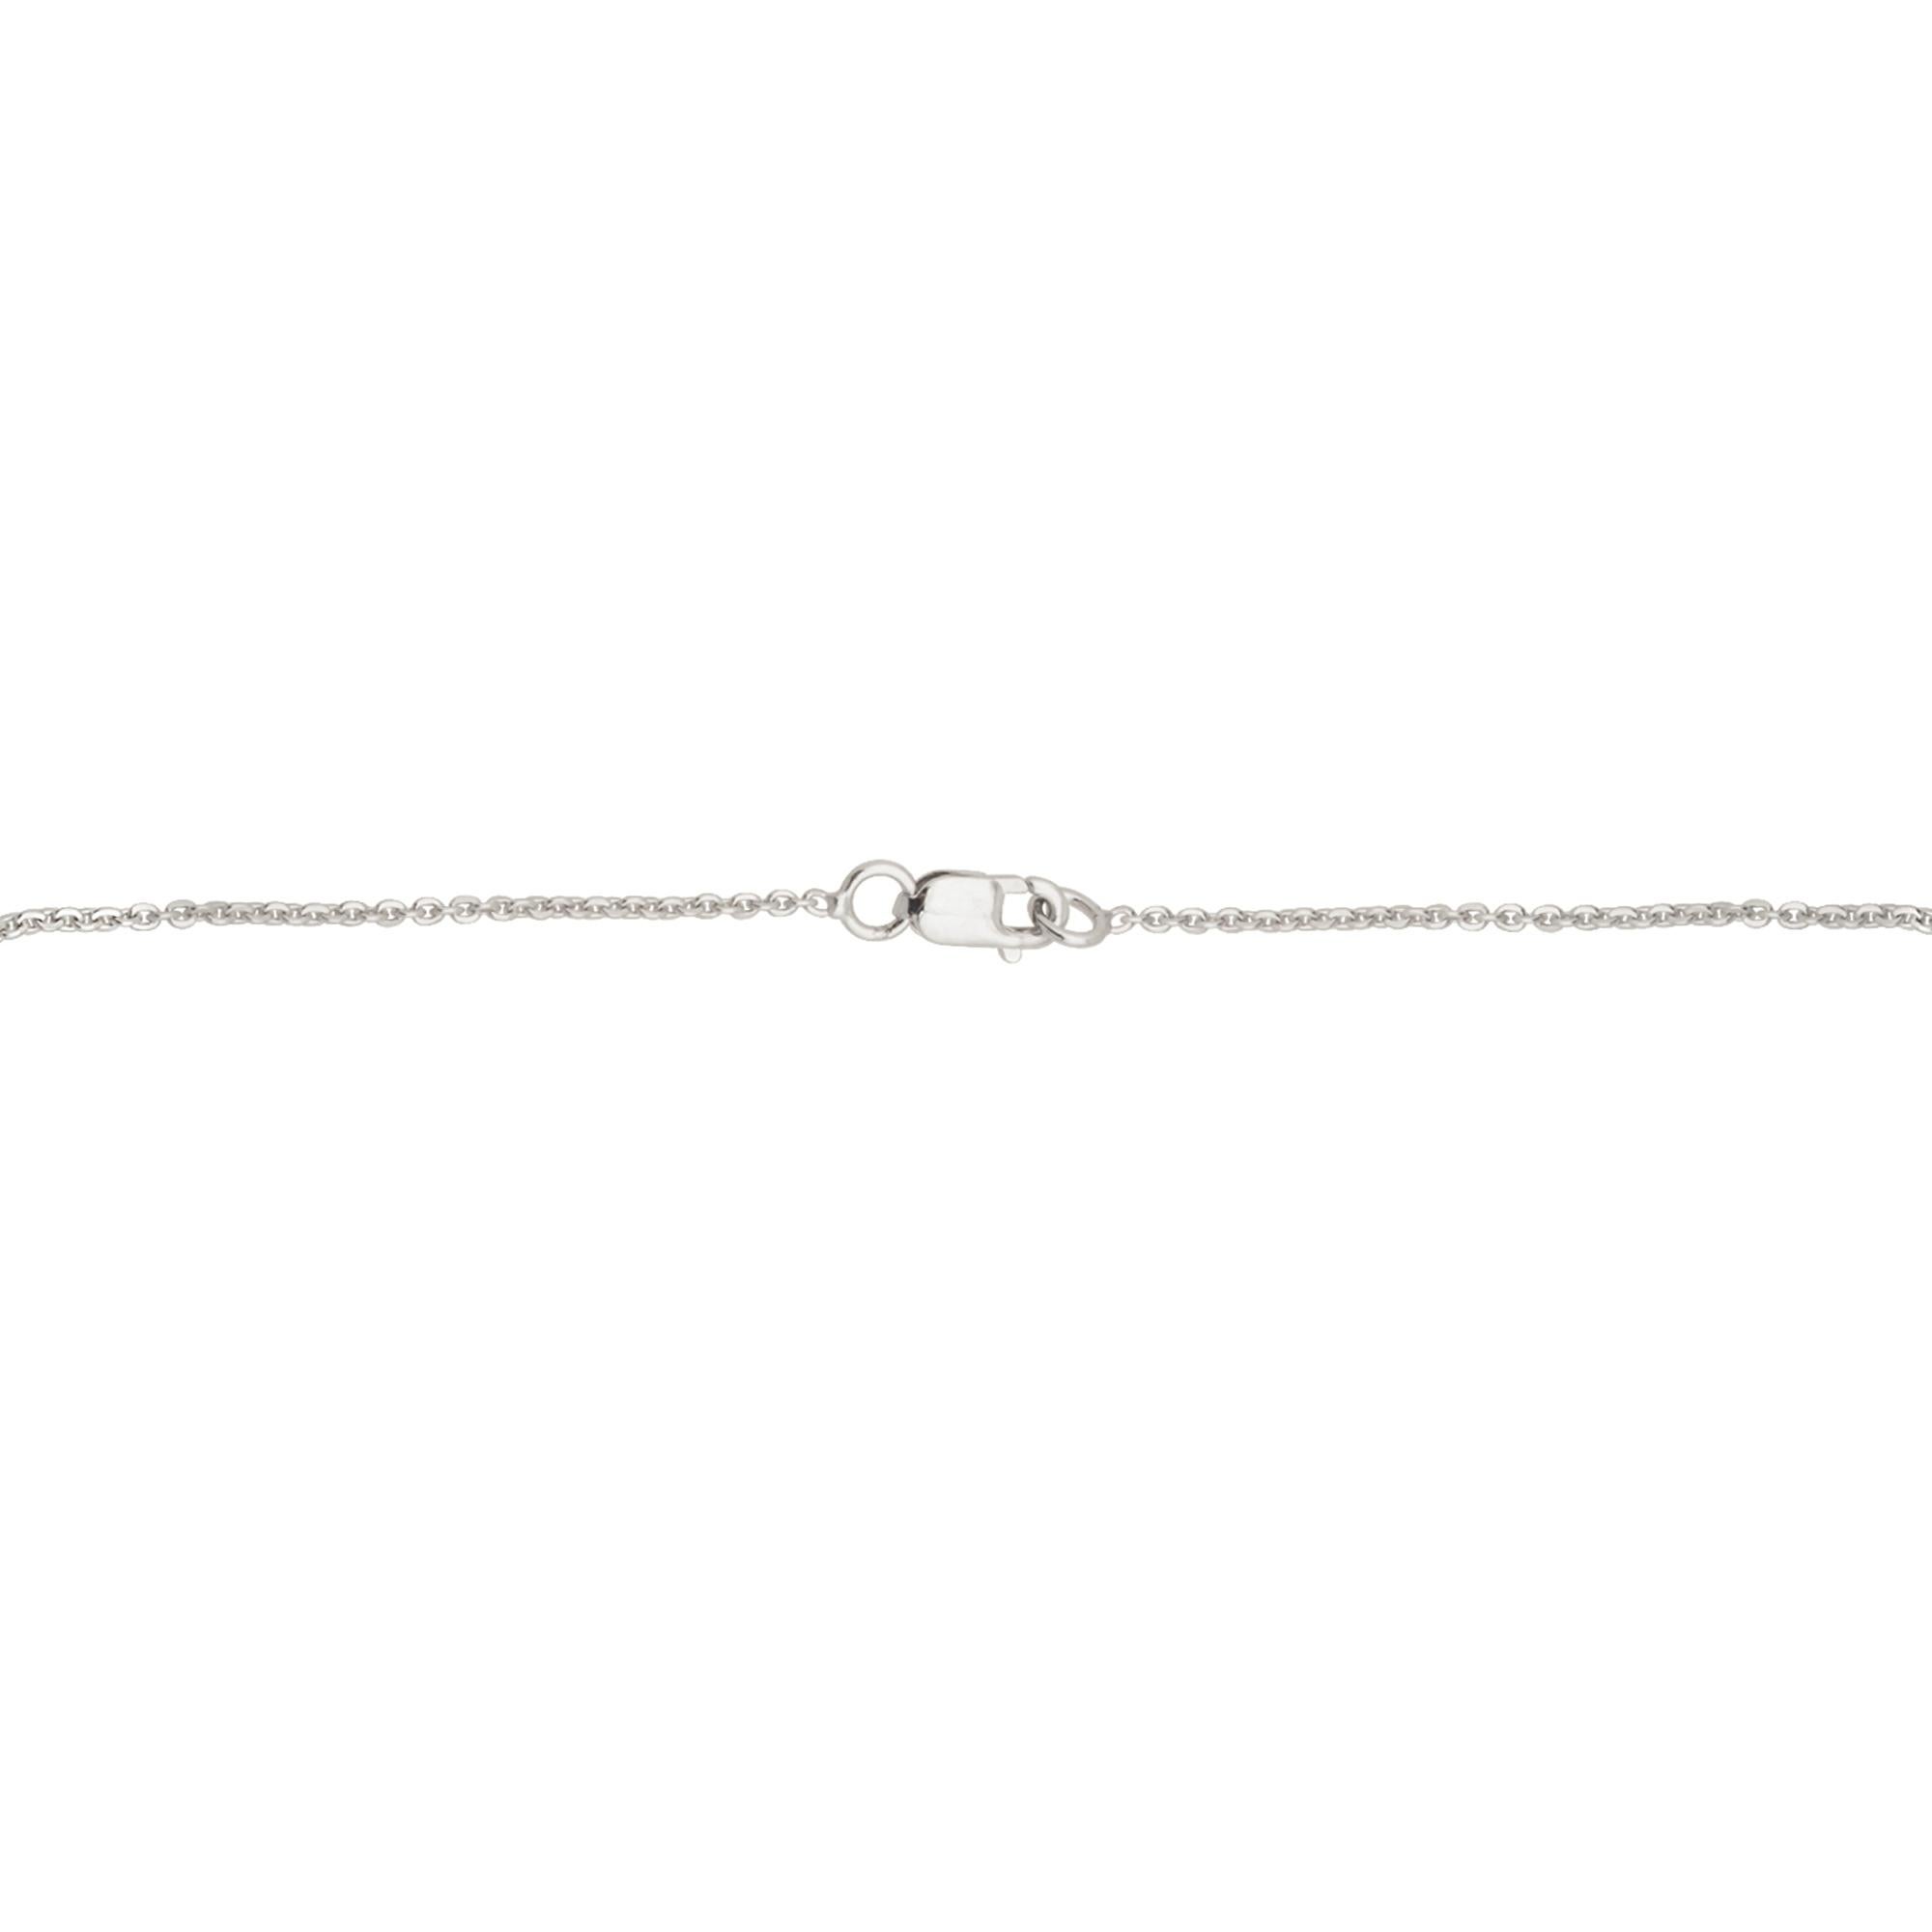 Women's 0.52 Carat Baguette Round Diamond Charm Necklace Solid 14k White Gold Jewelry For Sale